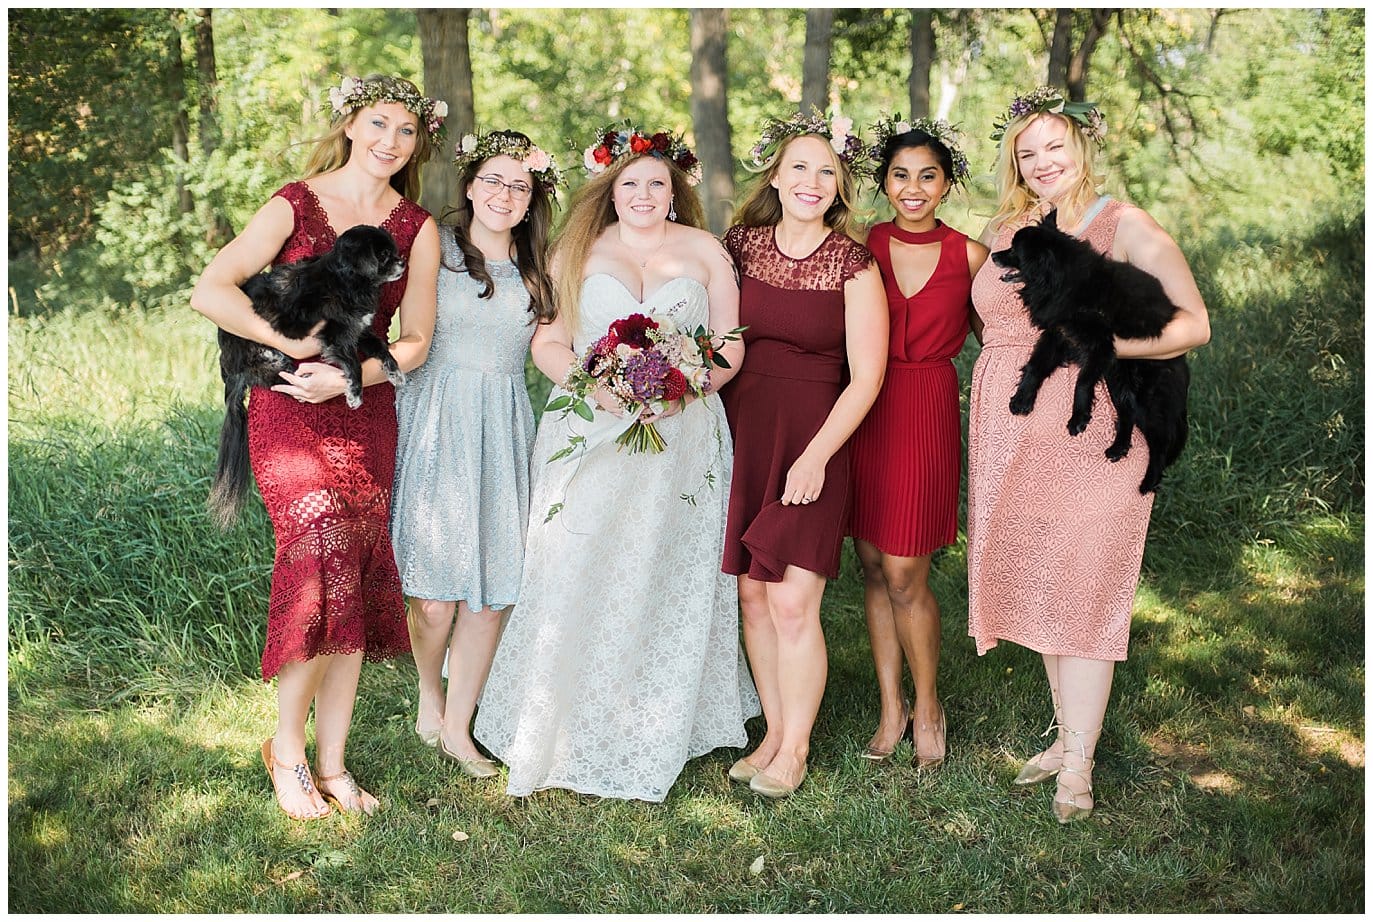 mismatched bridesmaid red dresses at Denver Botanic Gardens at Chatfield wedding by Lyons wedding photographer Jennie Crate photographer